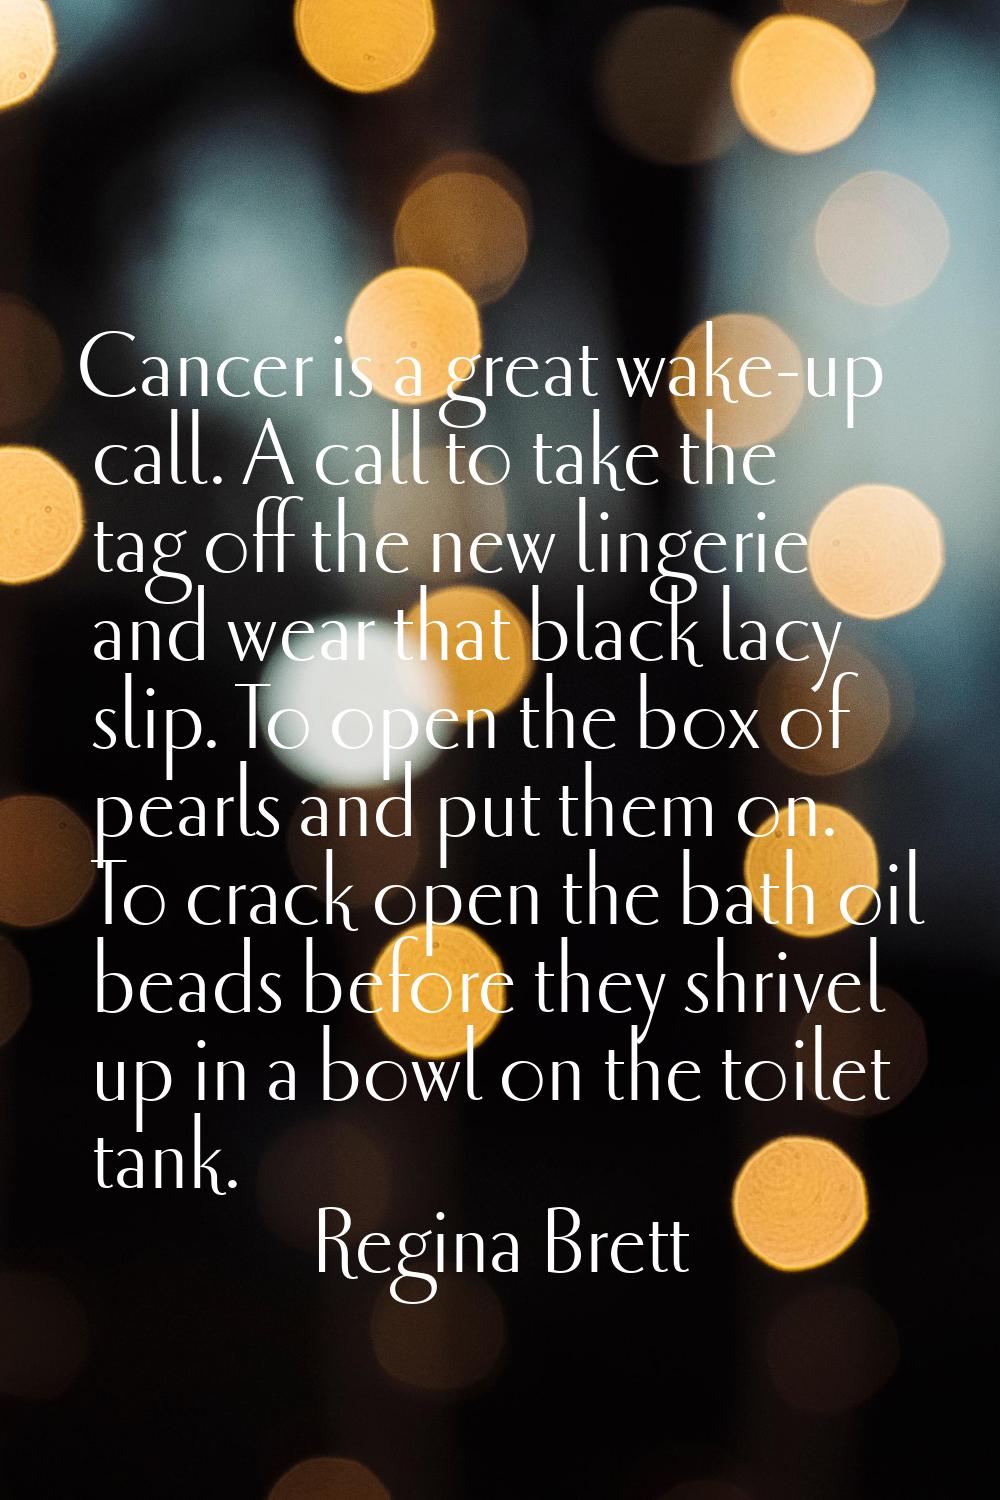 Cancer is a great wake-up call. A call to take the tag off the new lingerie and wear that black lac